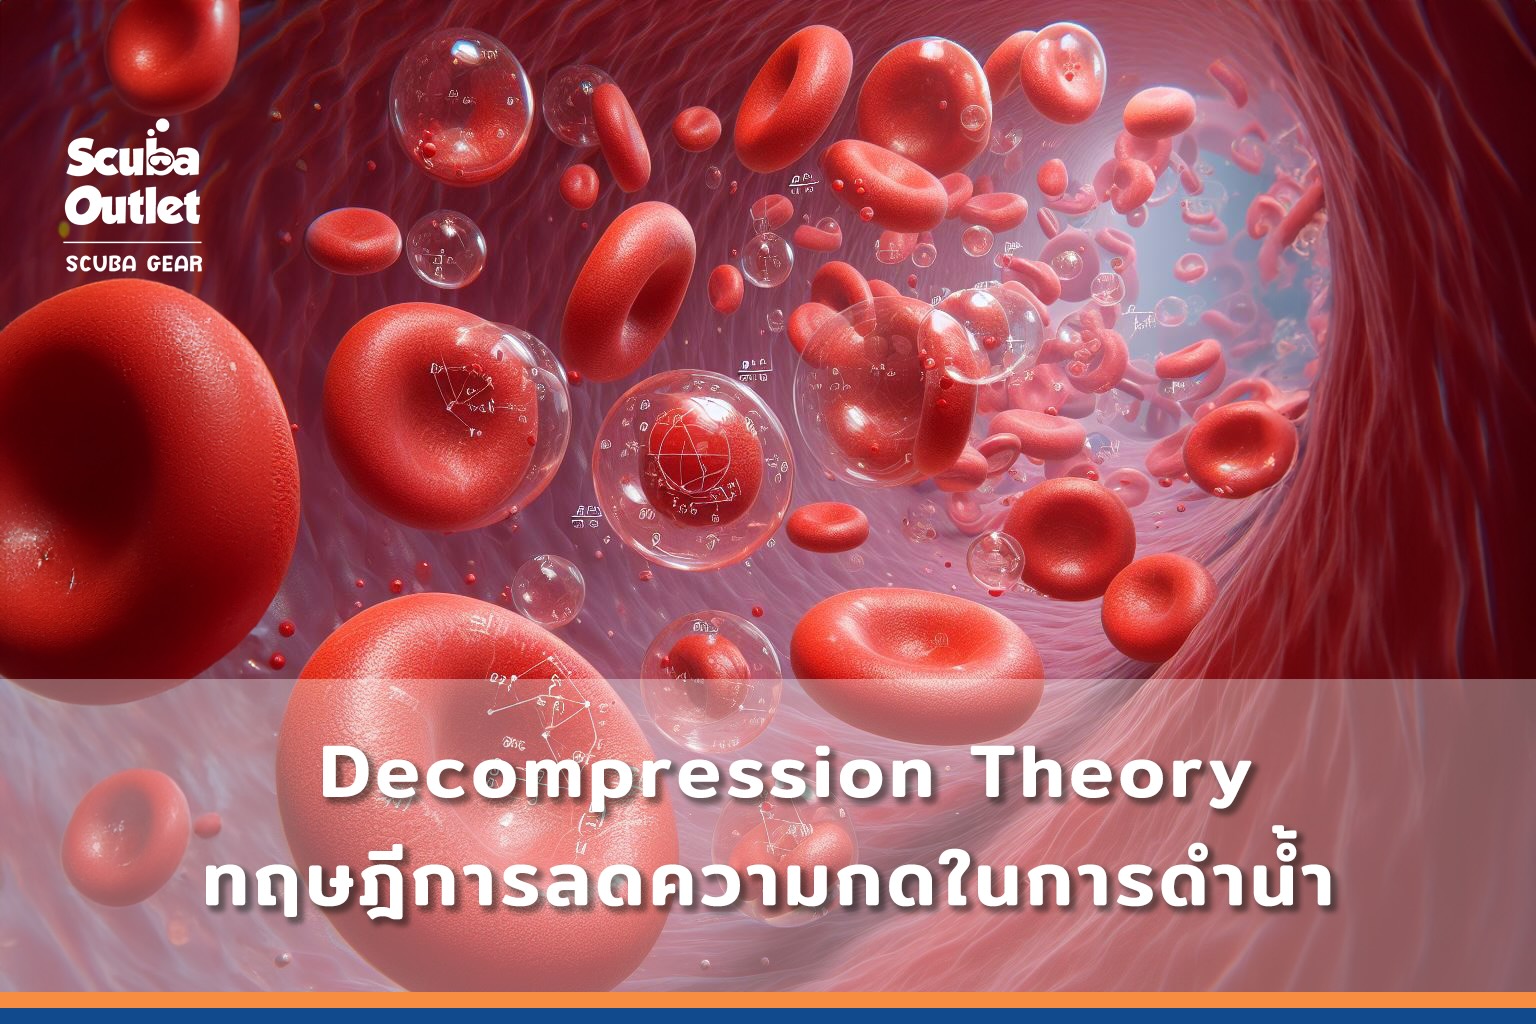 Blood Cells with Air Bubbles and Physics Equations (as banner for article)